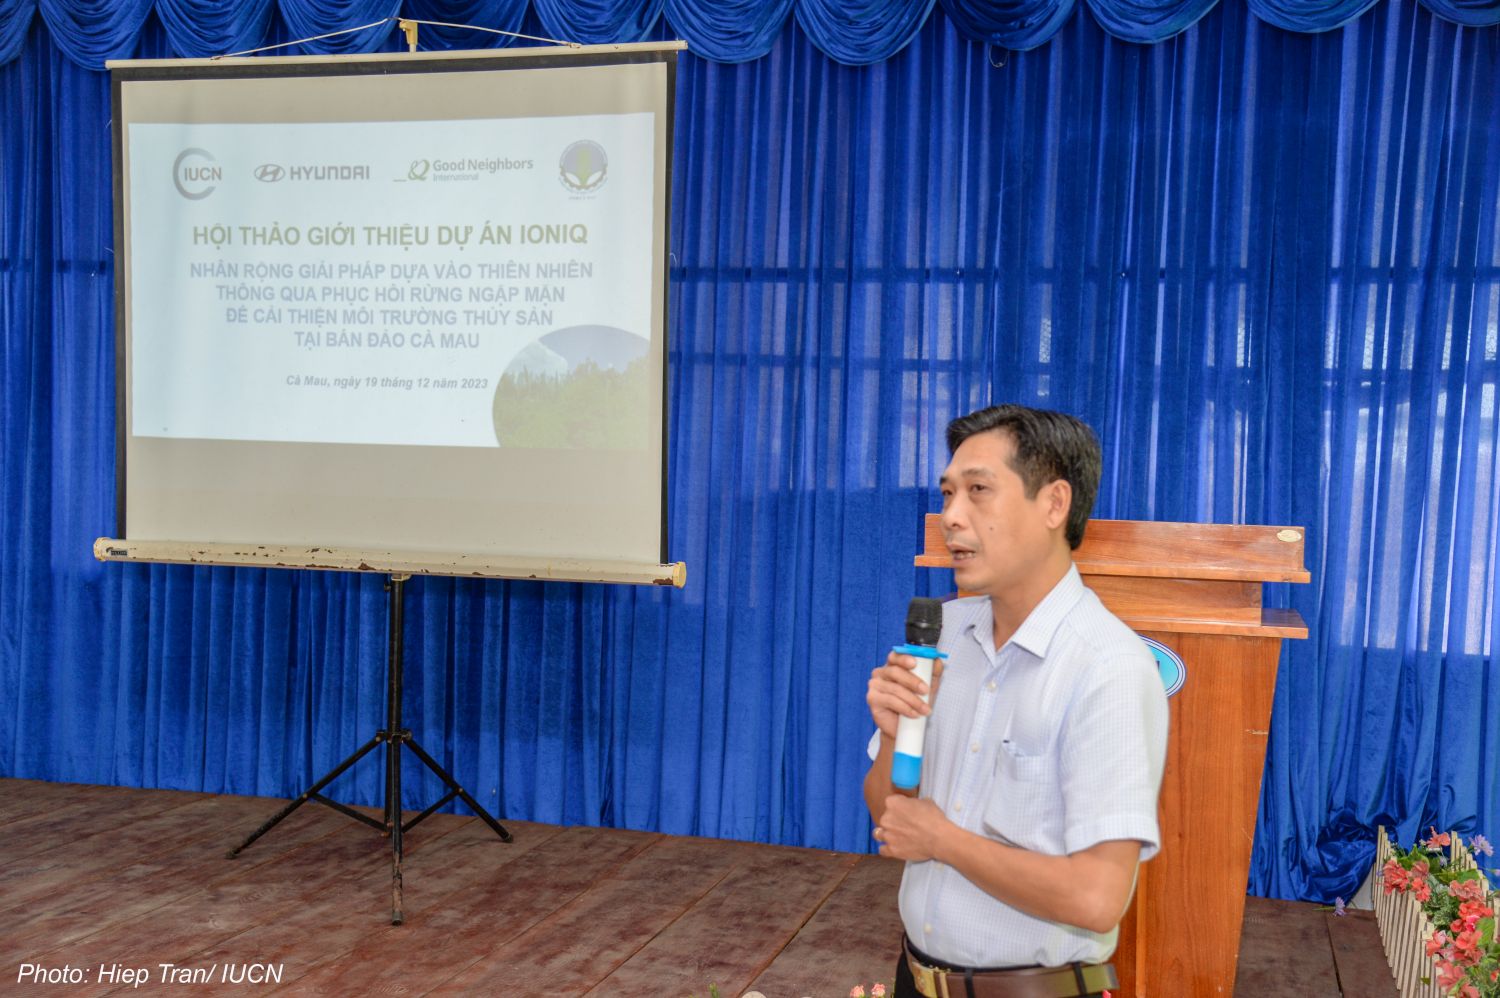 Mr. Truong Minh Thuan shared at the consultation